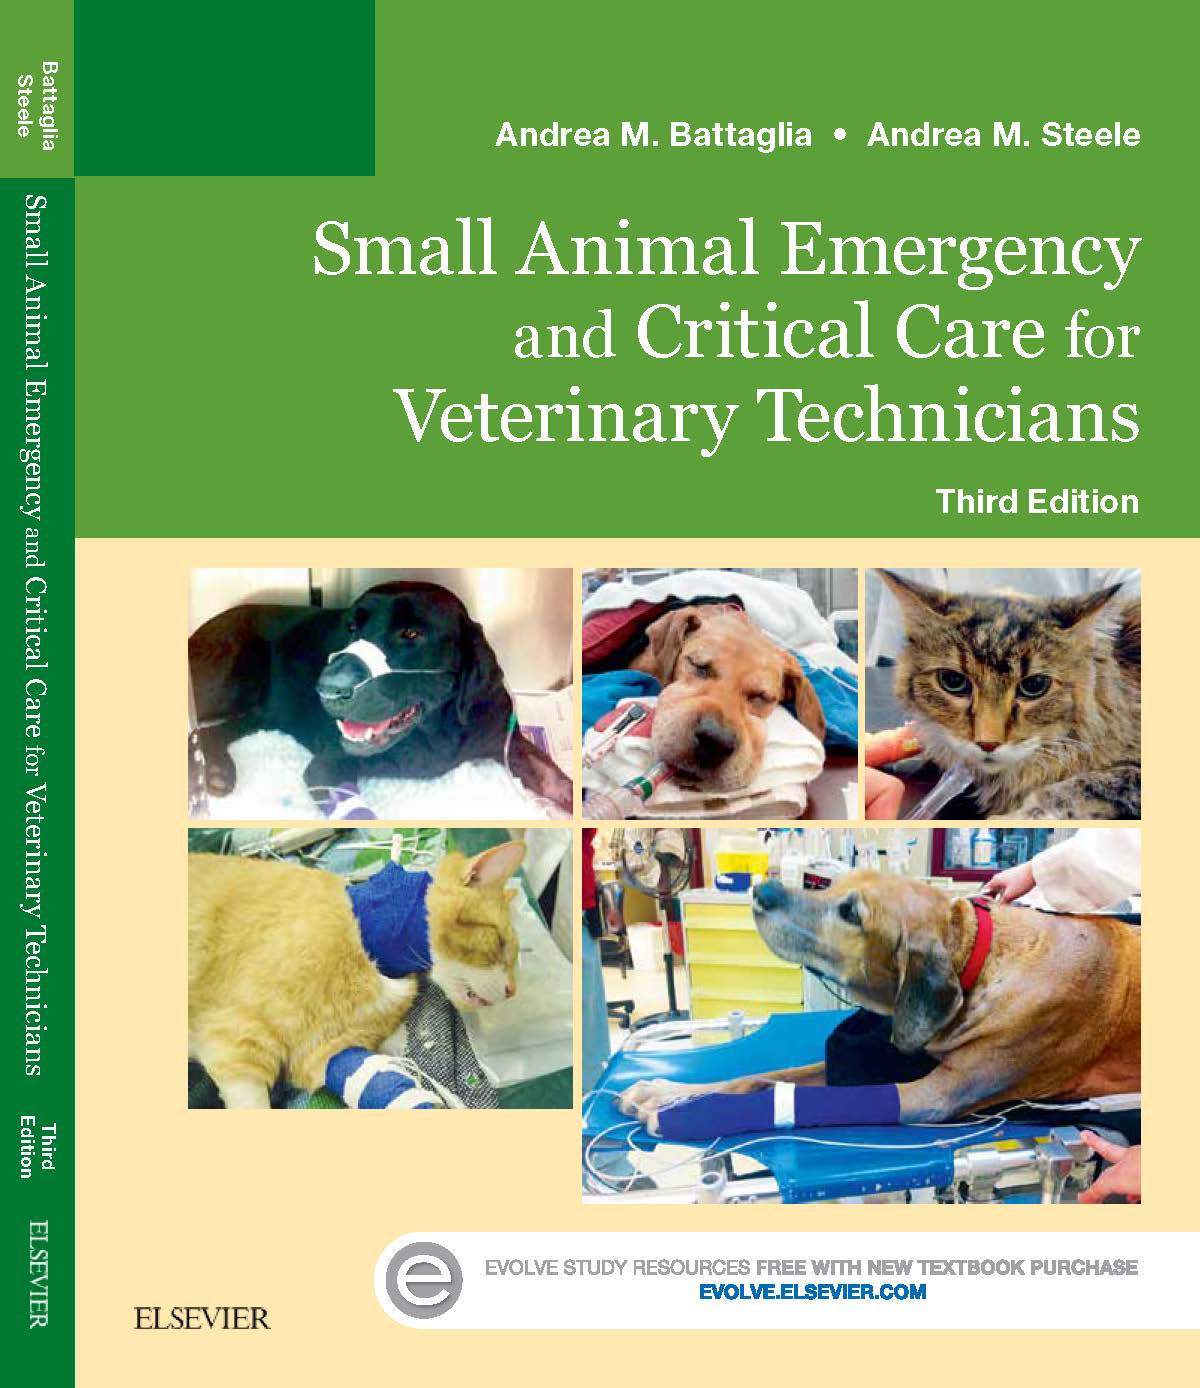 Pleased to announce the release of Small Animal Emergency and Critical Care for Technicians 3rd edition!